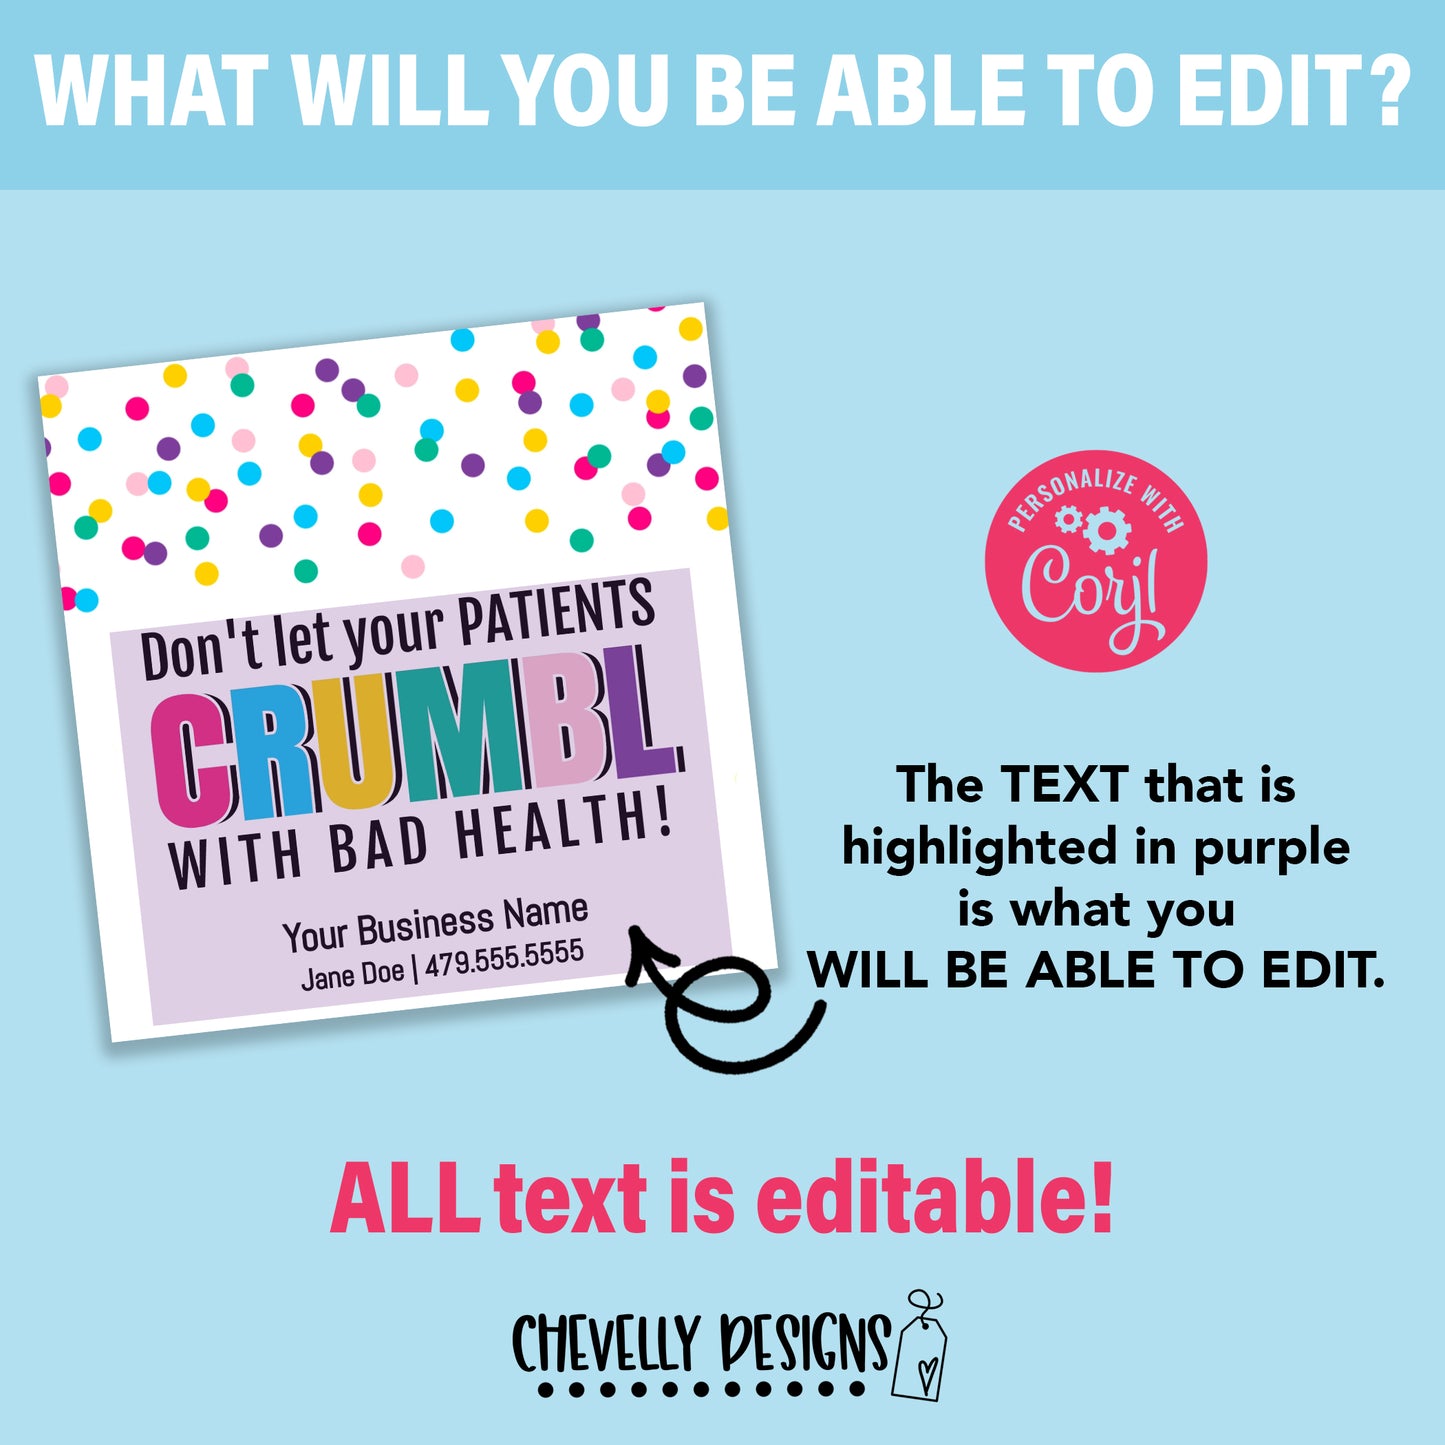 Editable - Don't Let Your Patients Crumbl with Bad Health - Business Gift Tags - Printable Digital File